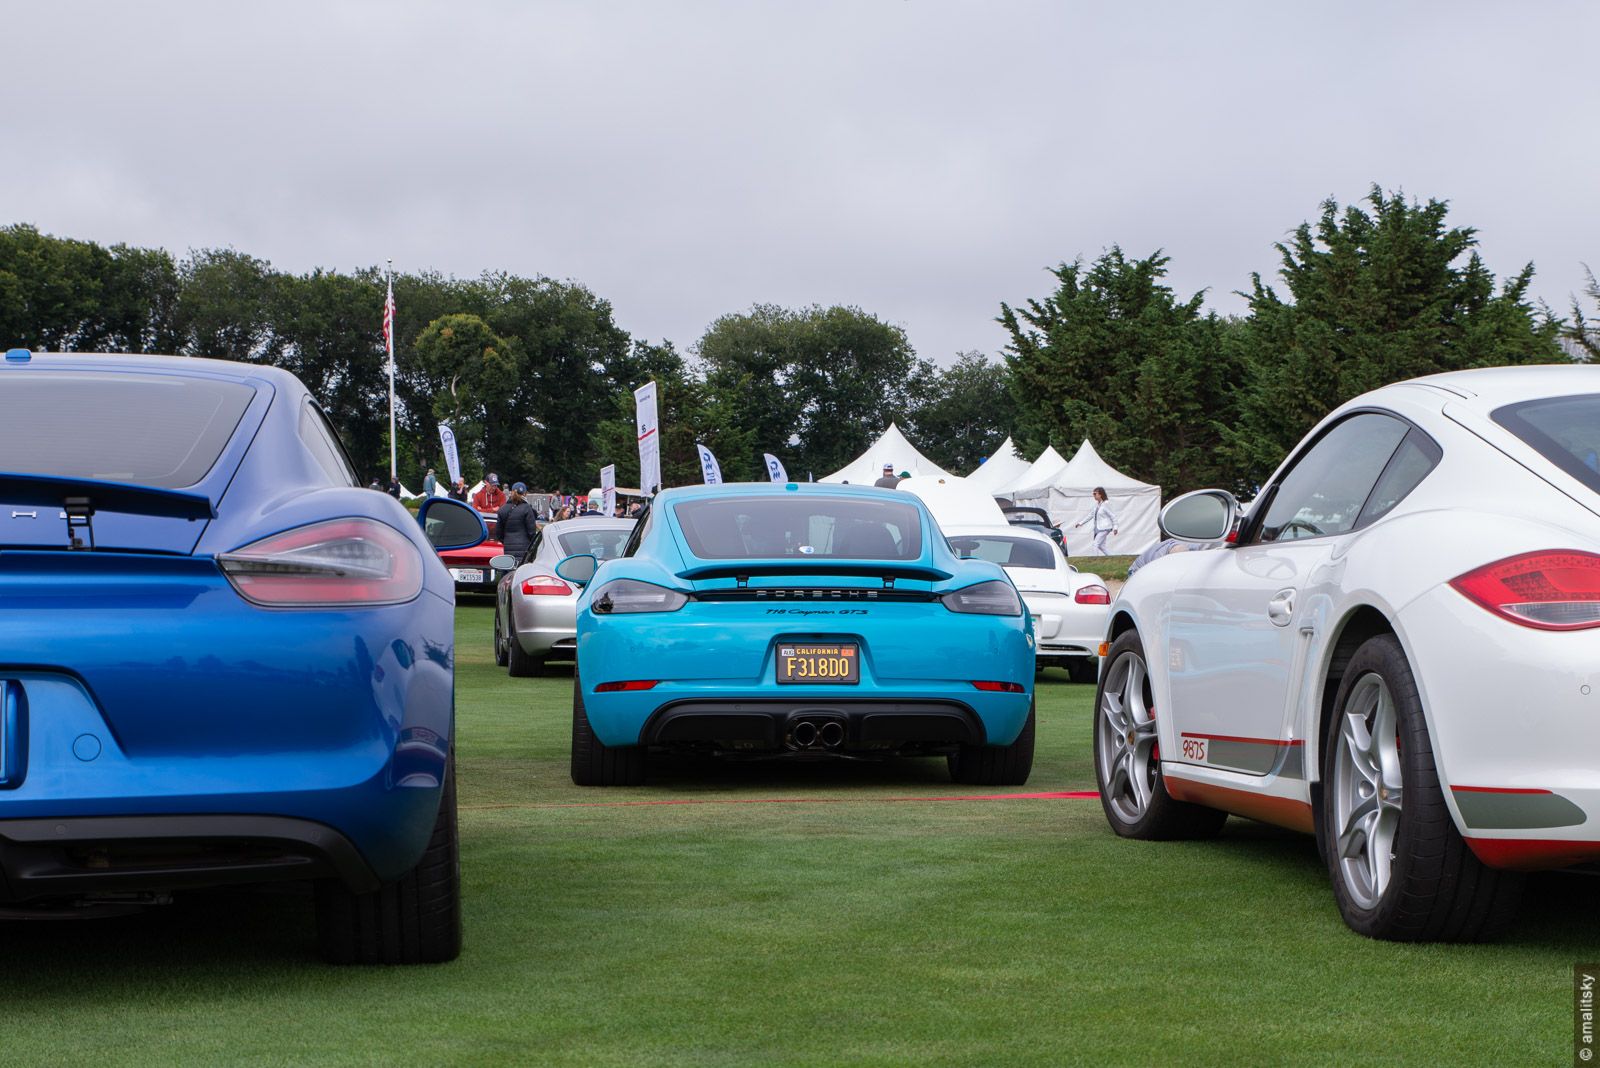 Porsche Cayman 987S, 981 and 718 (982). Mid-engined bunch